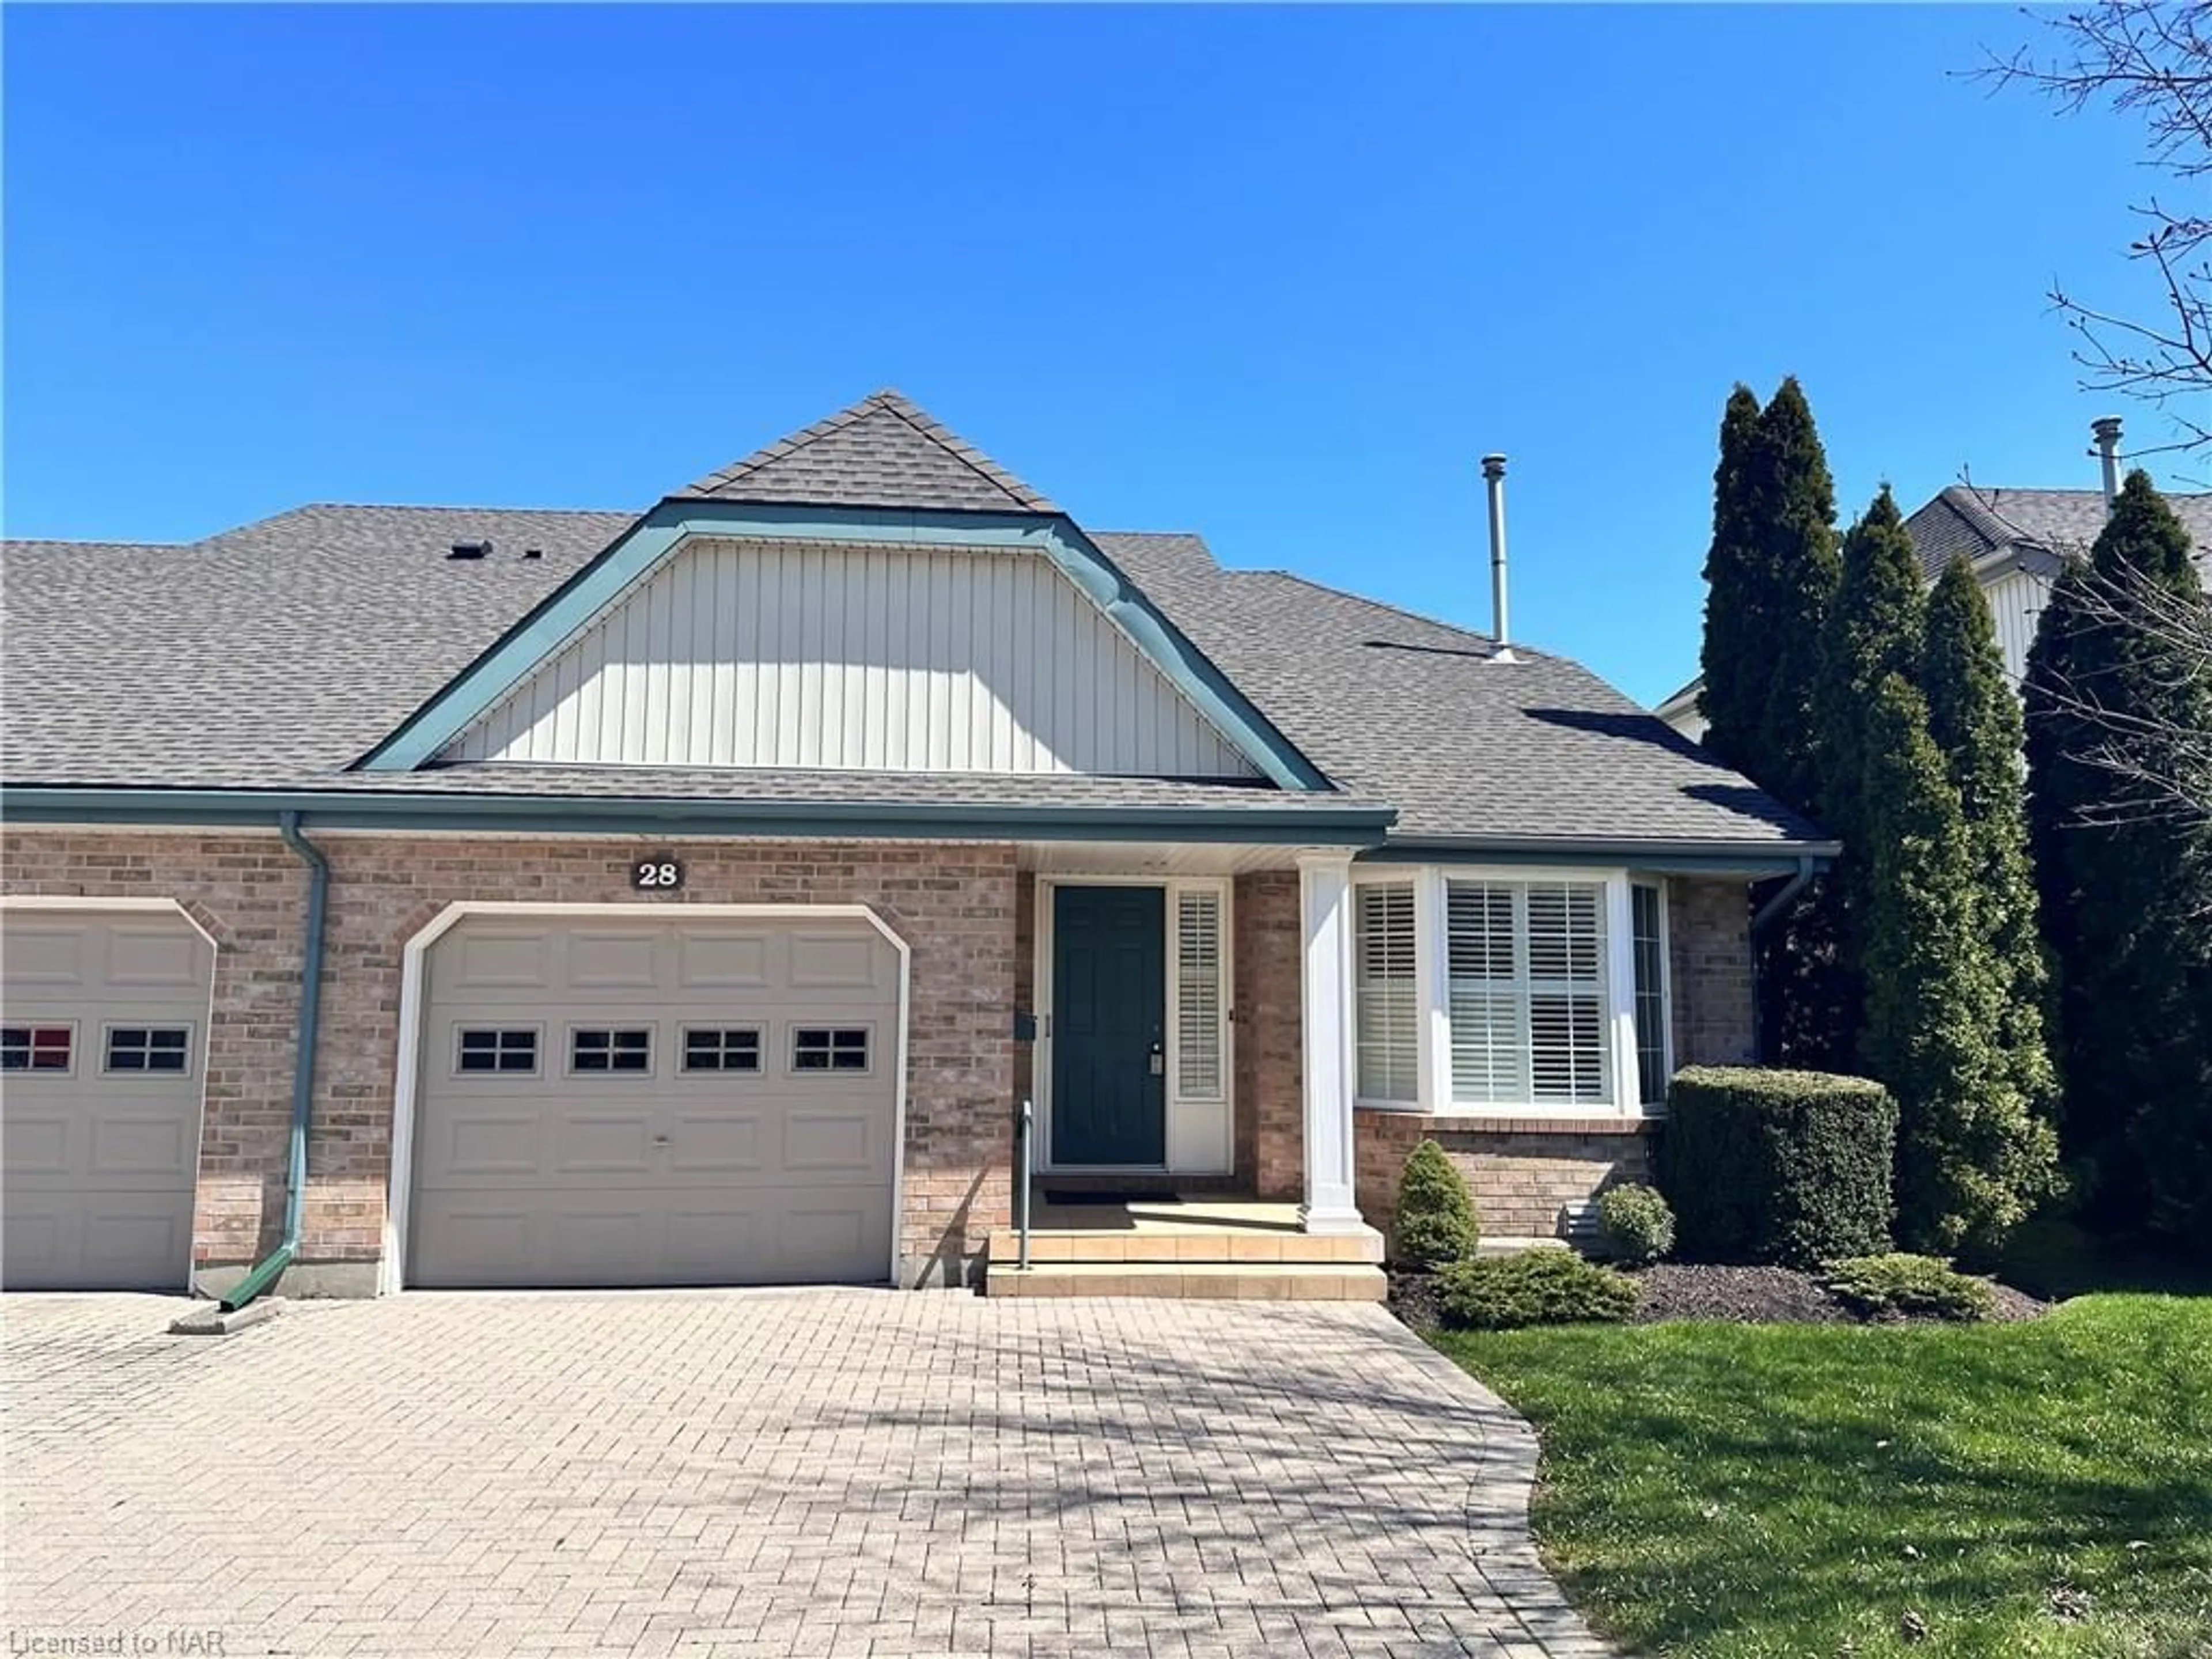 Home with brick exterior material for 121 Glen Morris Dr #28, St. Catharines Ontario L2T 4C5